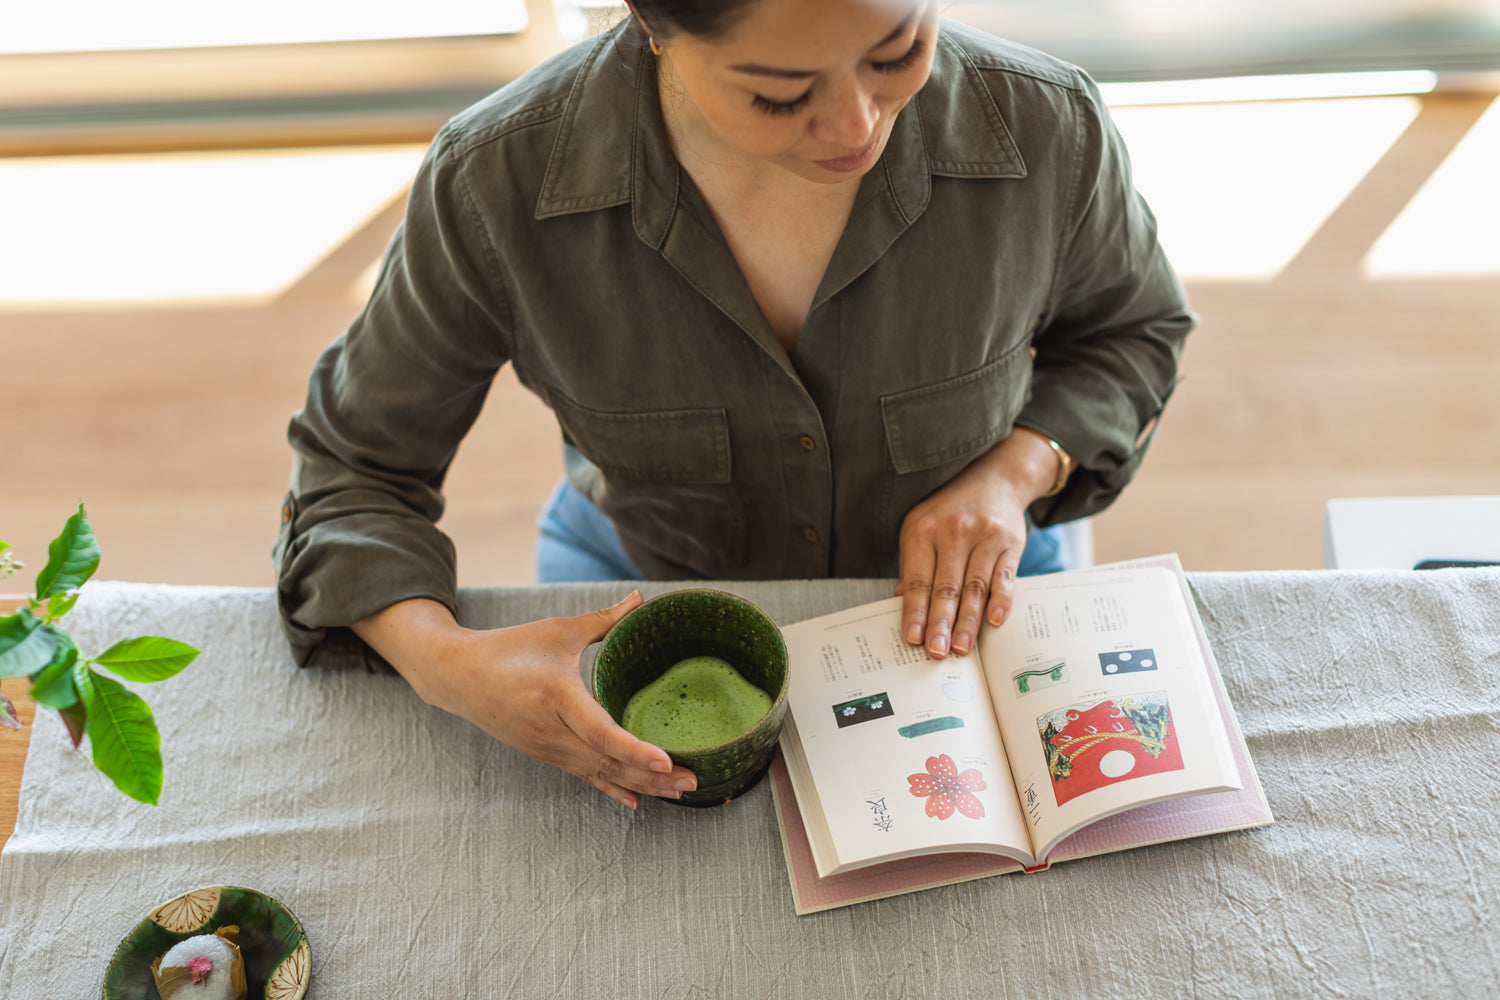 A bird’s eye view of a person reading a colorful book, with one hand around a cup of bright green, fresh matcha.